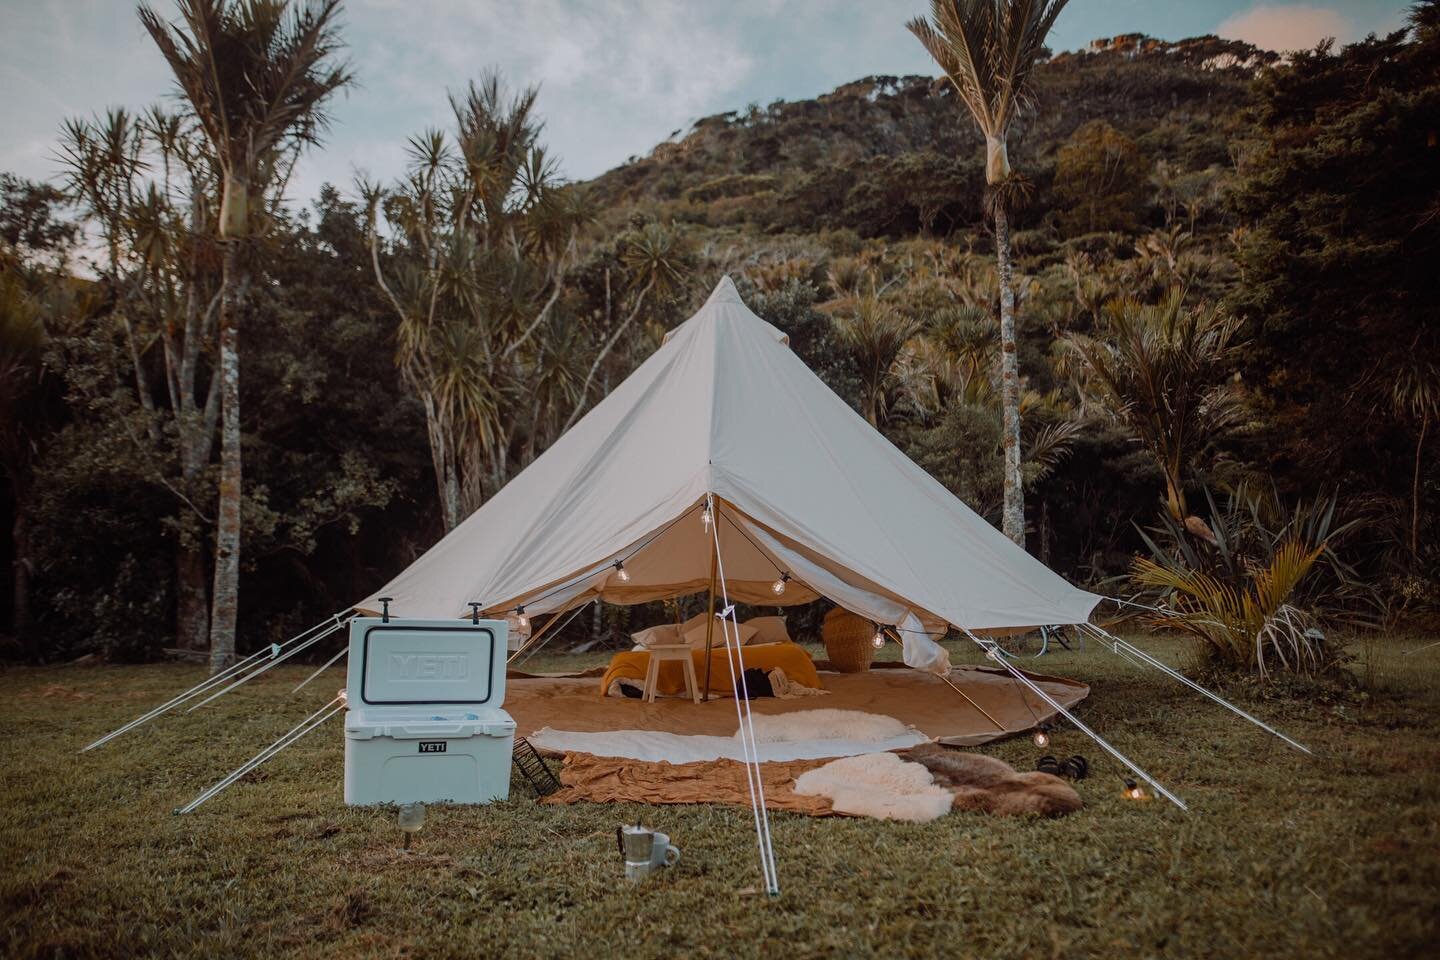 No better way than to let the summer breeze in, than to roll up the sides and crack open a cold one. Planning your festival accommodation or need something fun for a wedding? ... drop us a DM ⛺️available to book for September dates onwards ⛺️ .
.
.
.